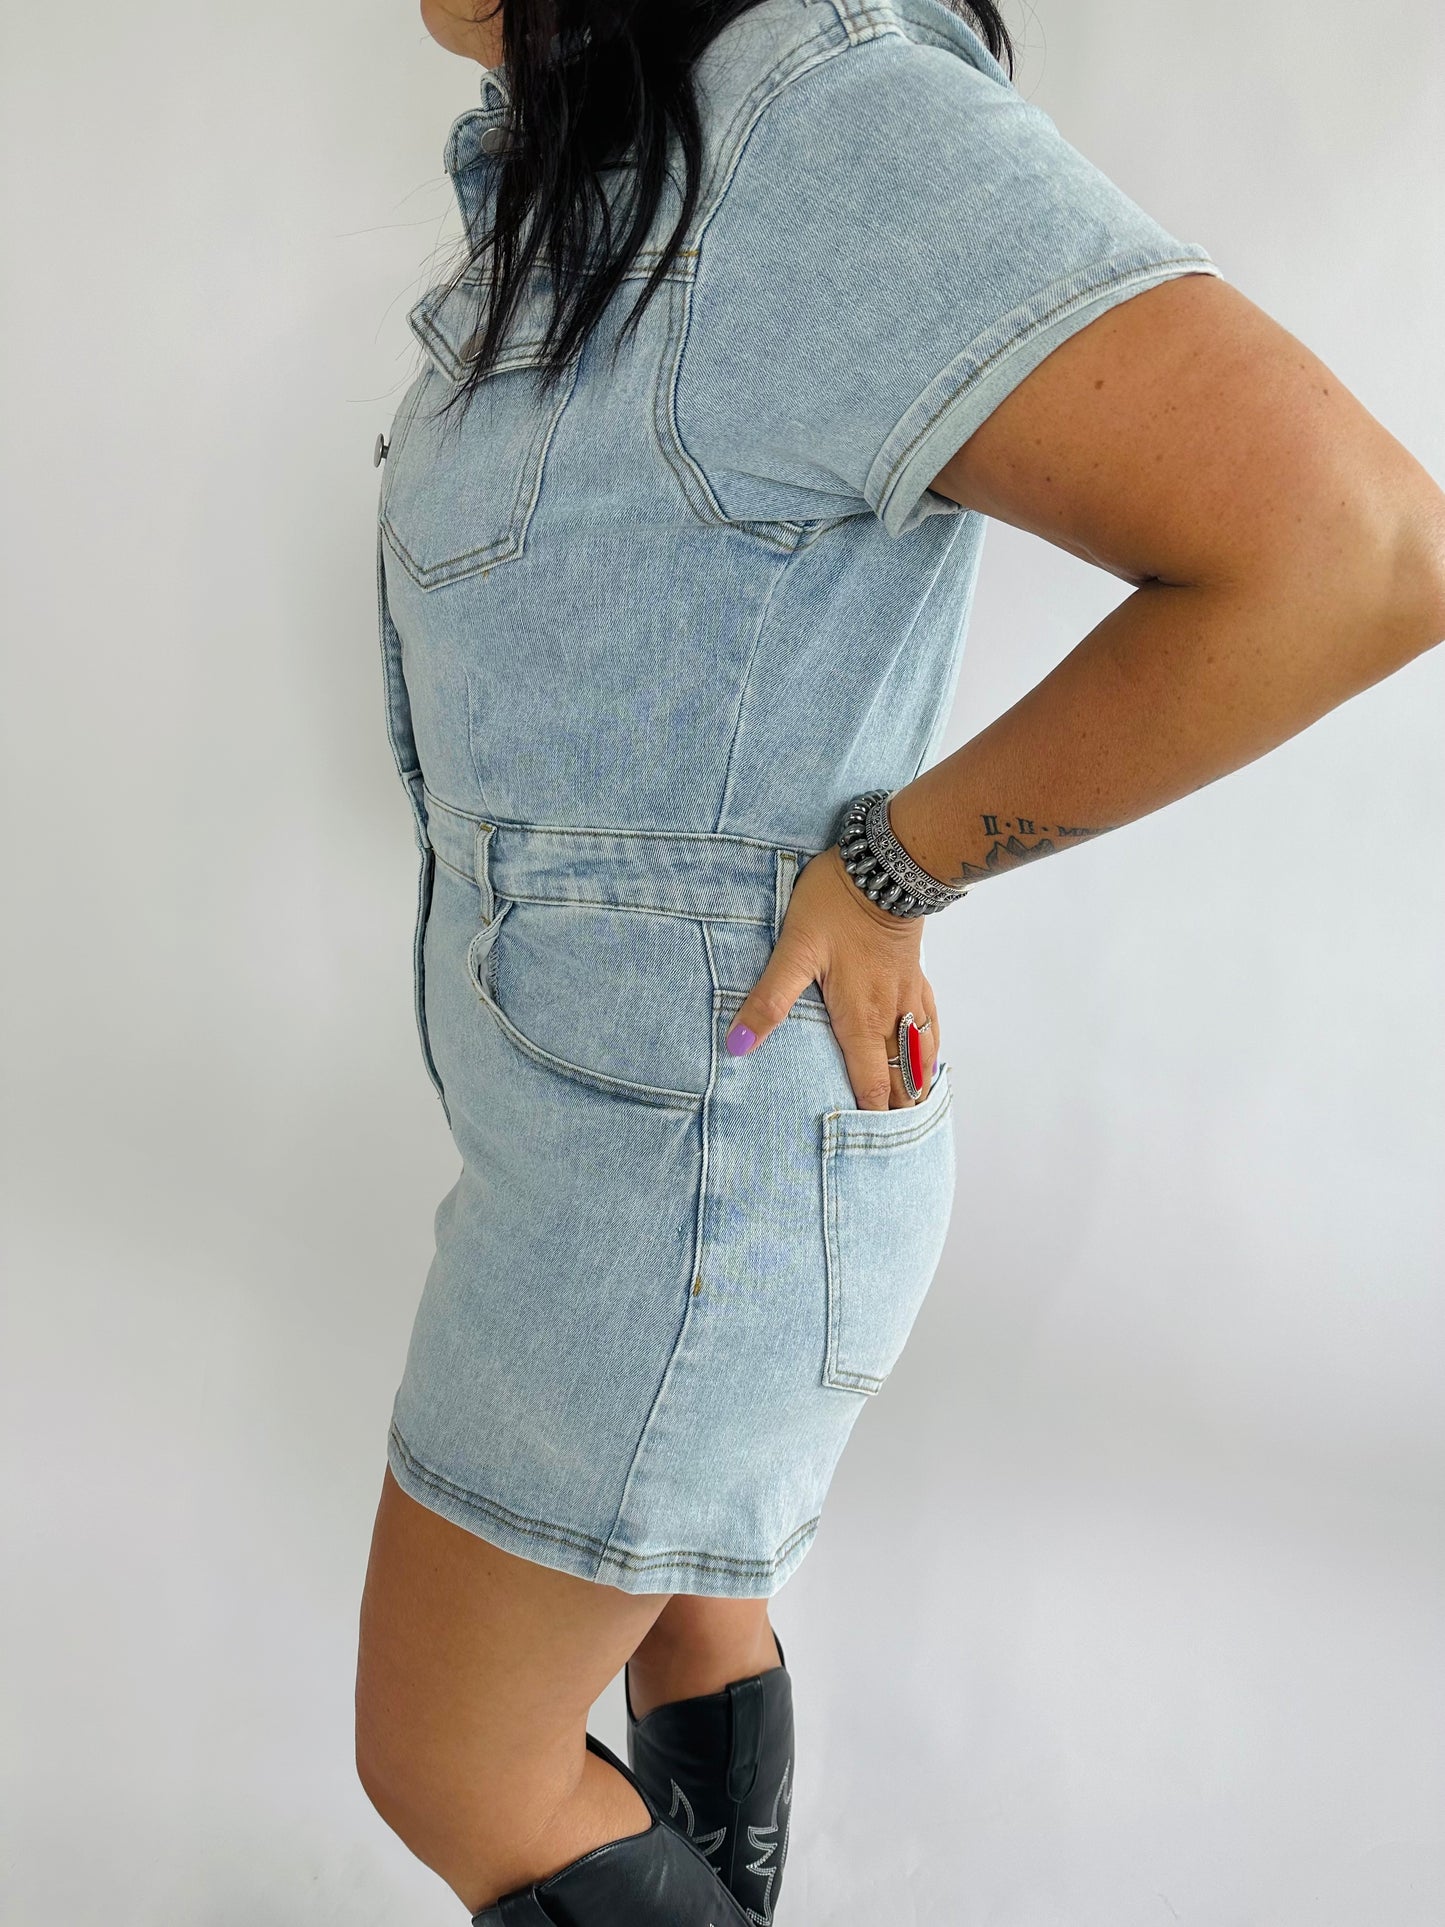 Making some Mistakes Denim Romper top